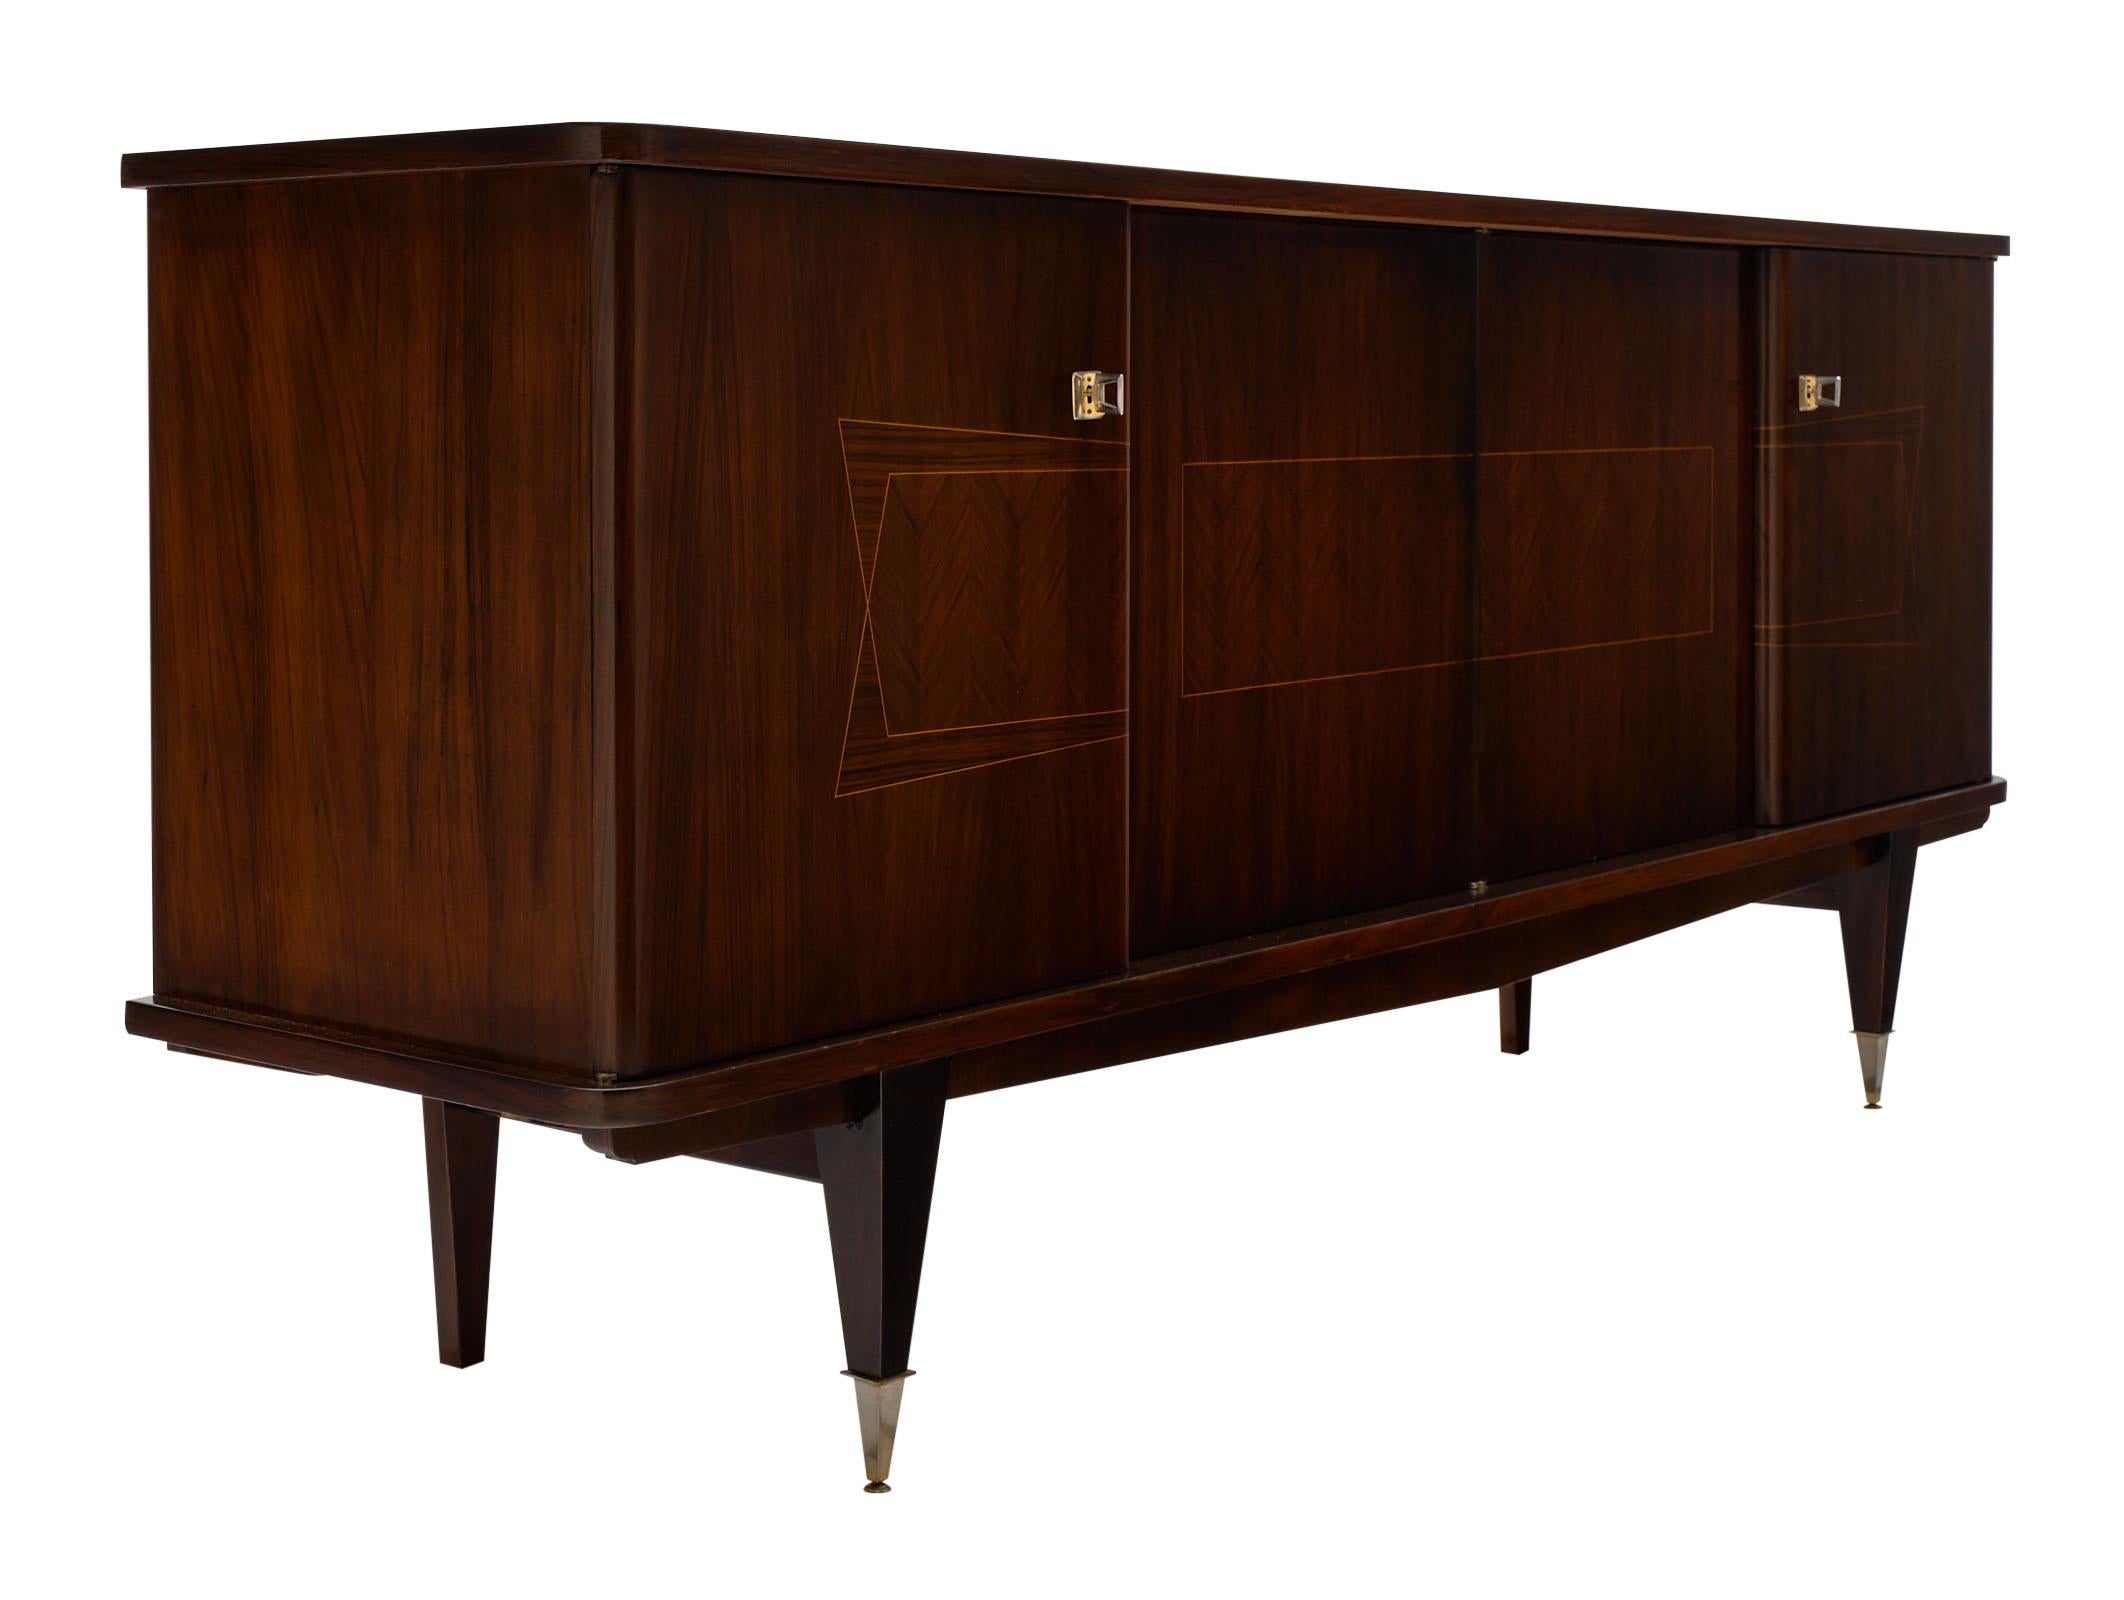 Macassar vintage French buffet with a lustrous high gloss finish. The four doors open up to a lemon wood interior featuring shelves and a drawer. The Macassar exterior has a beautiful midcentury detail across the front of this striking piece. The